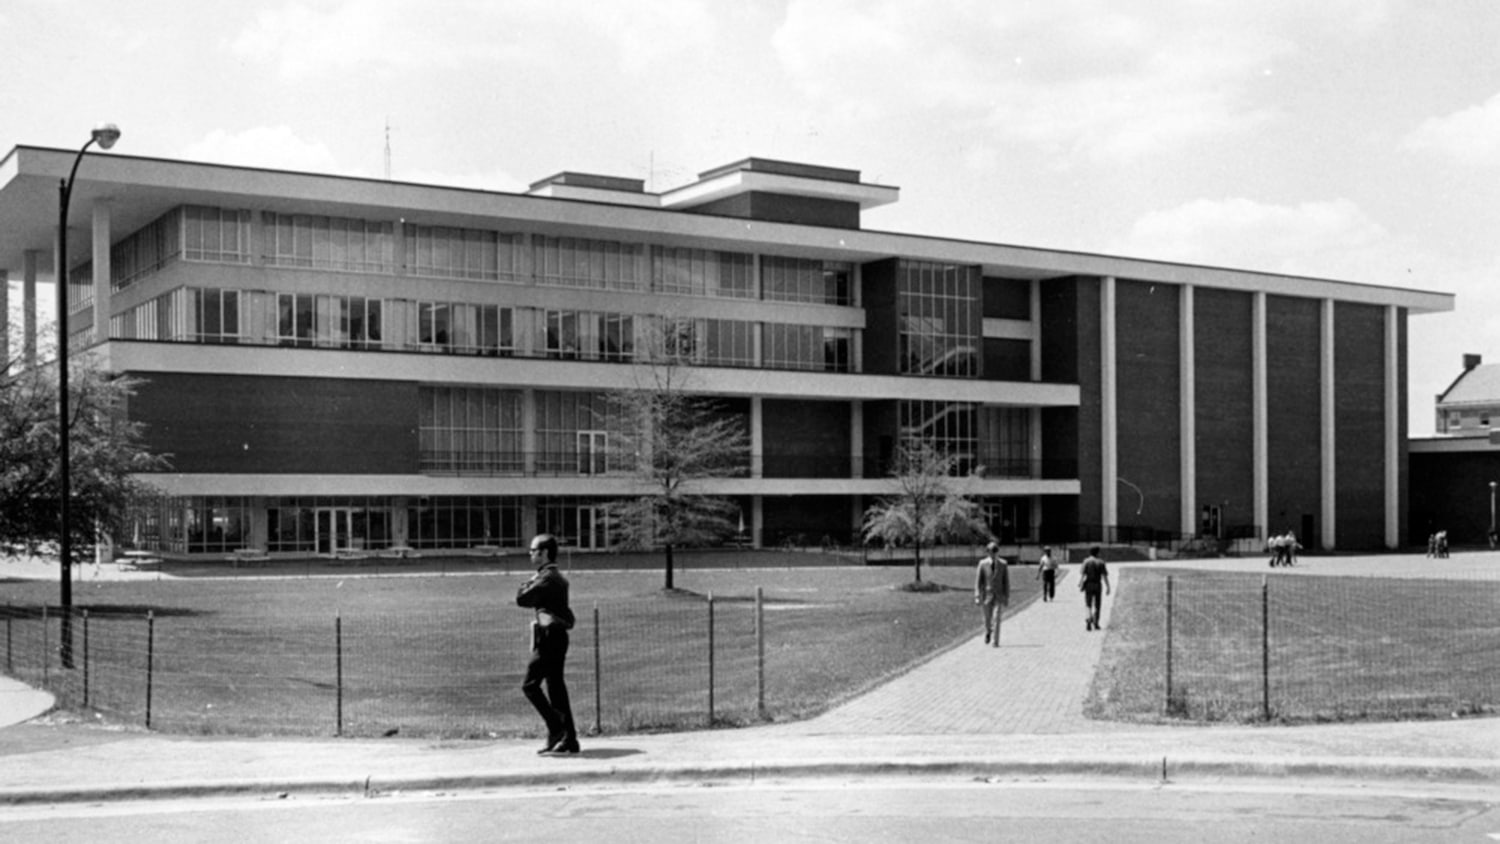 Black and white exterior photo of the original University Student Center with people walking by.